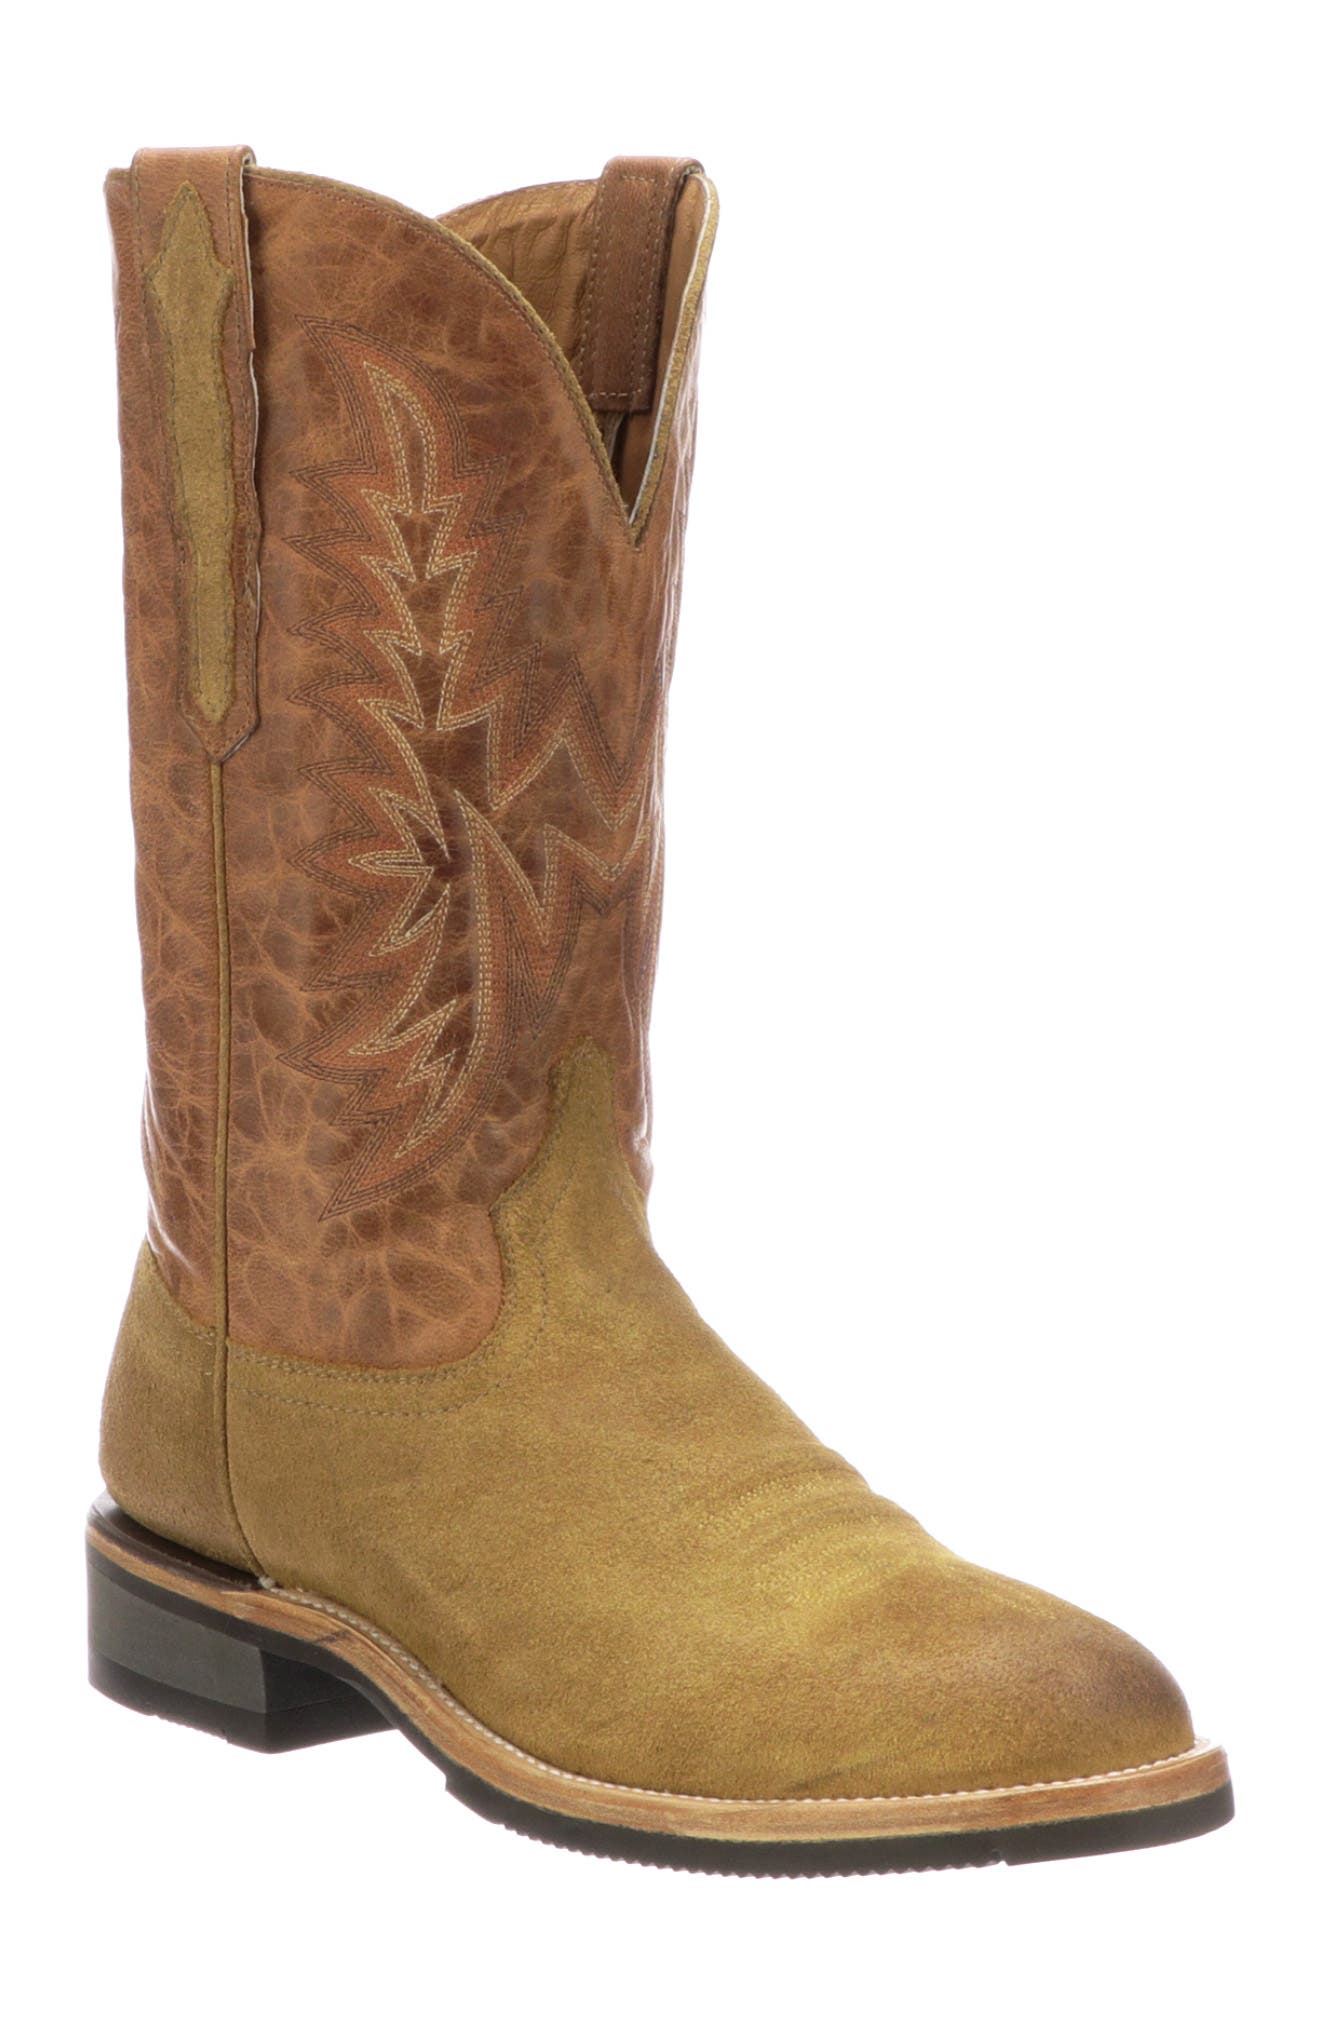 Sale: Men's Lucchese Boots | Nordstrom